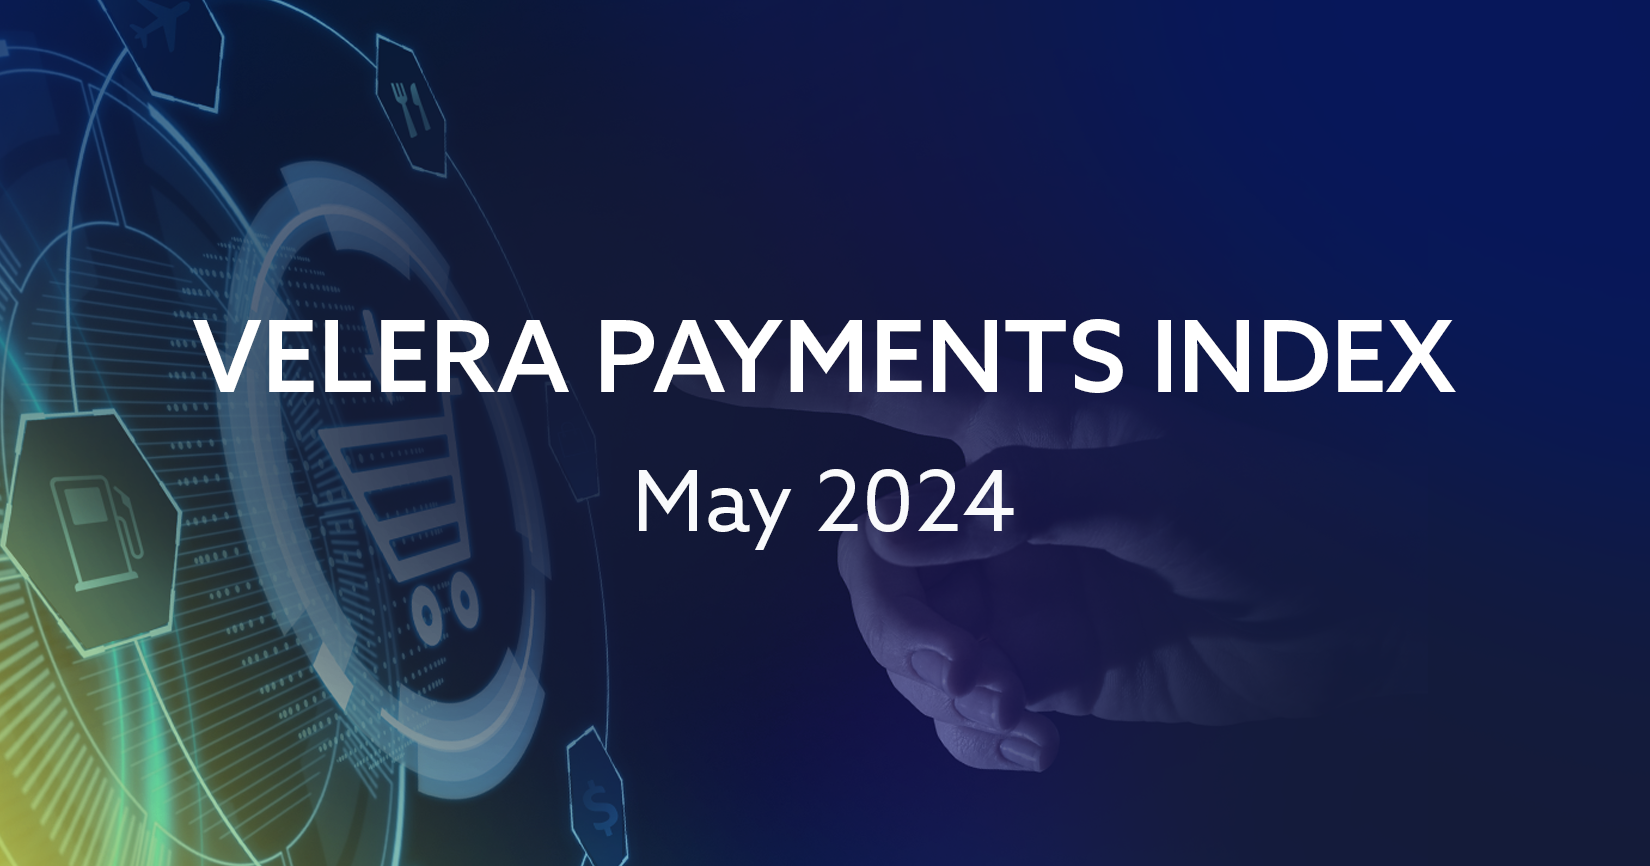 The Velera Payments Index May 2024: A Deep Dive into Overall Food